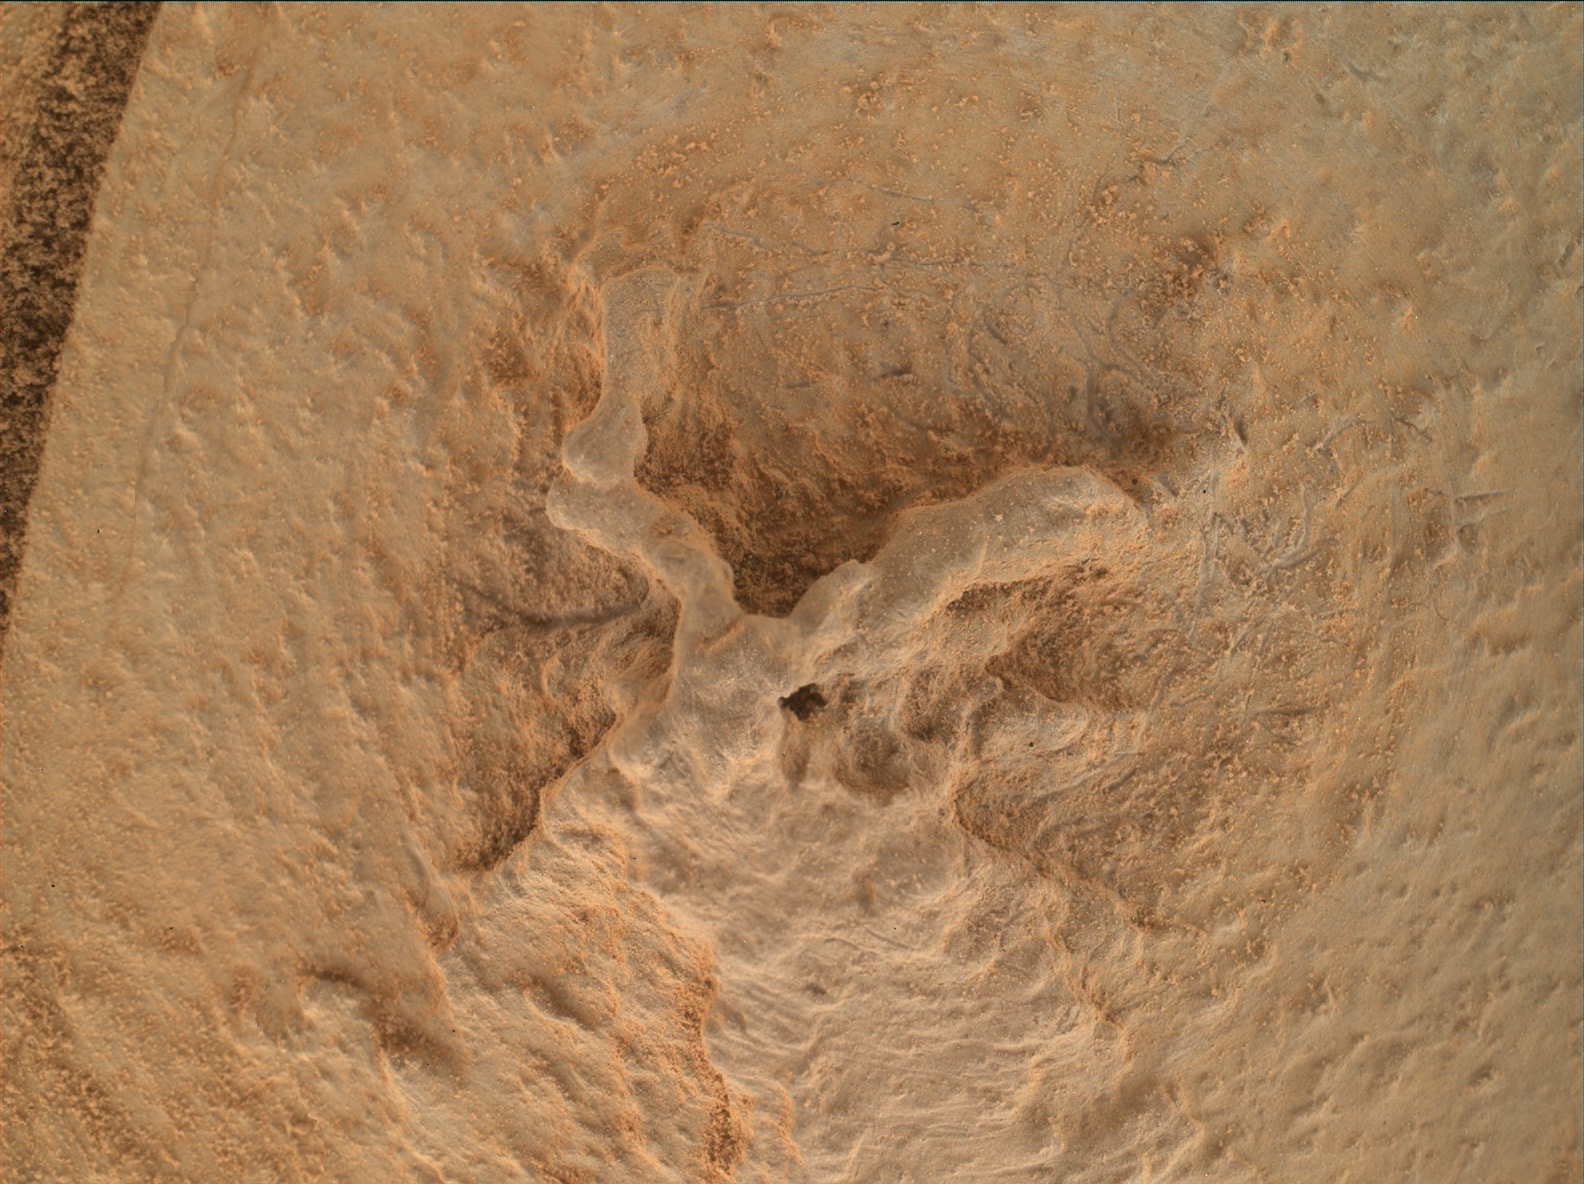 Nasa's Mars rover Curiosity acquired this image using its Mars Hand Lens Imager (MAHLI) on Sol 775